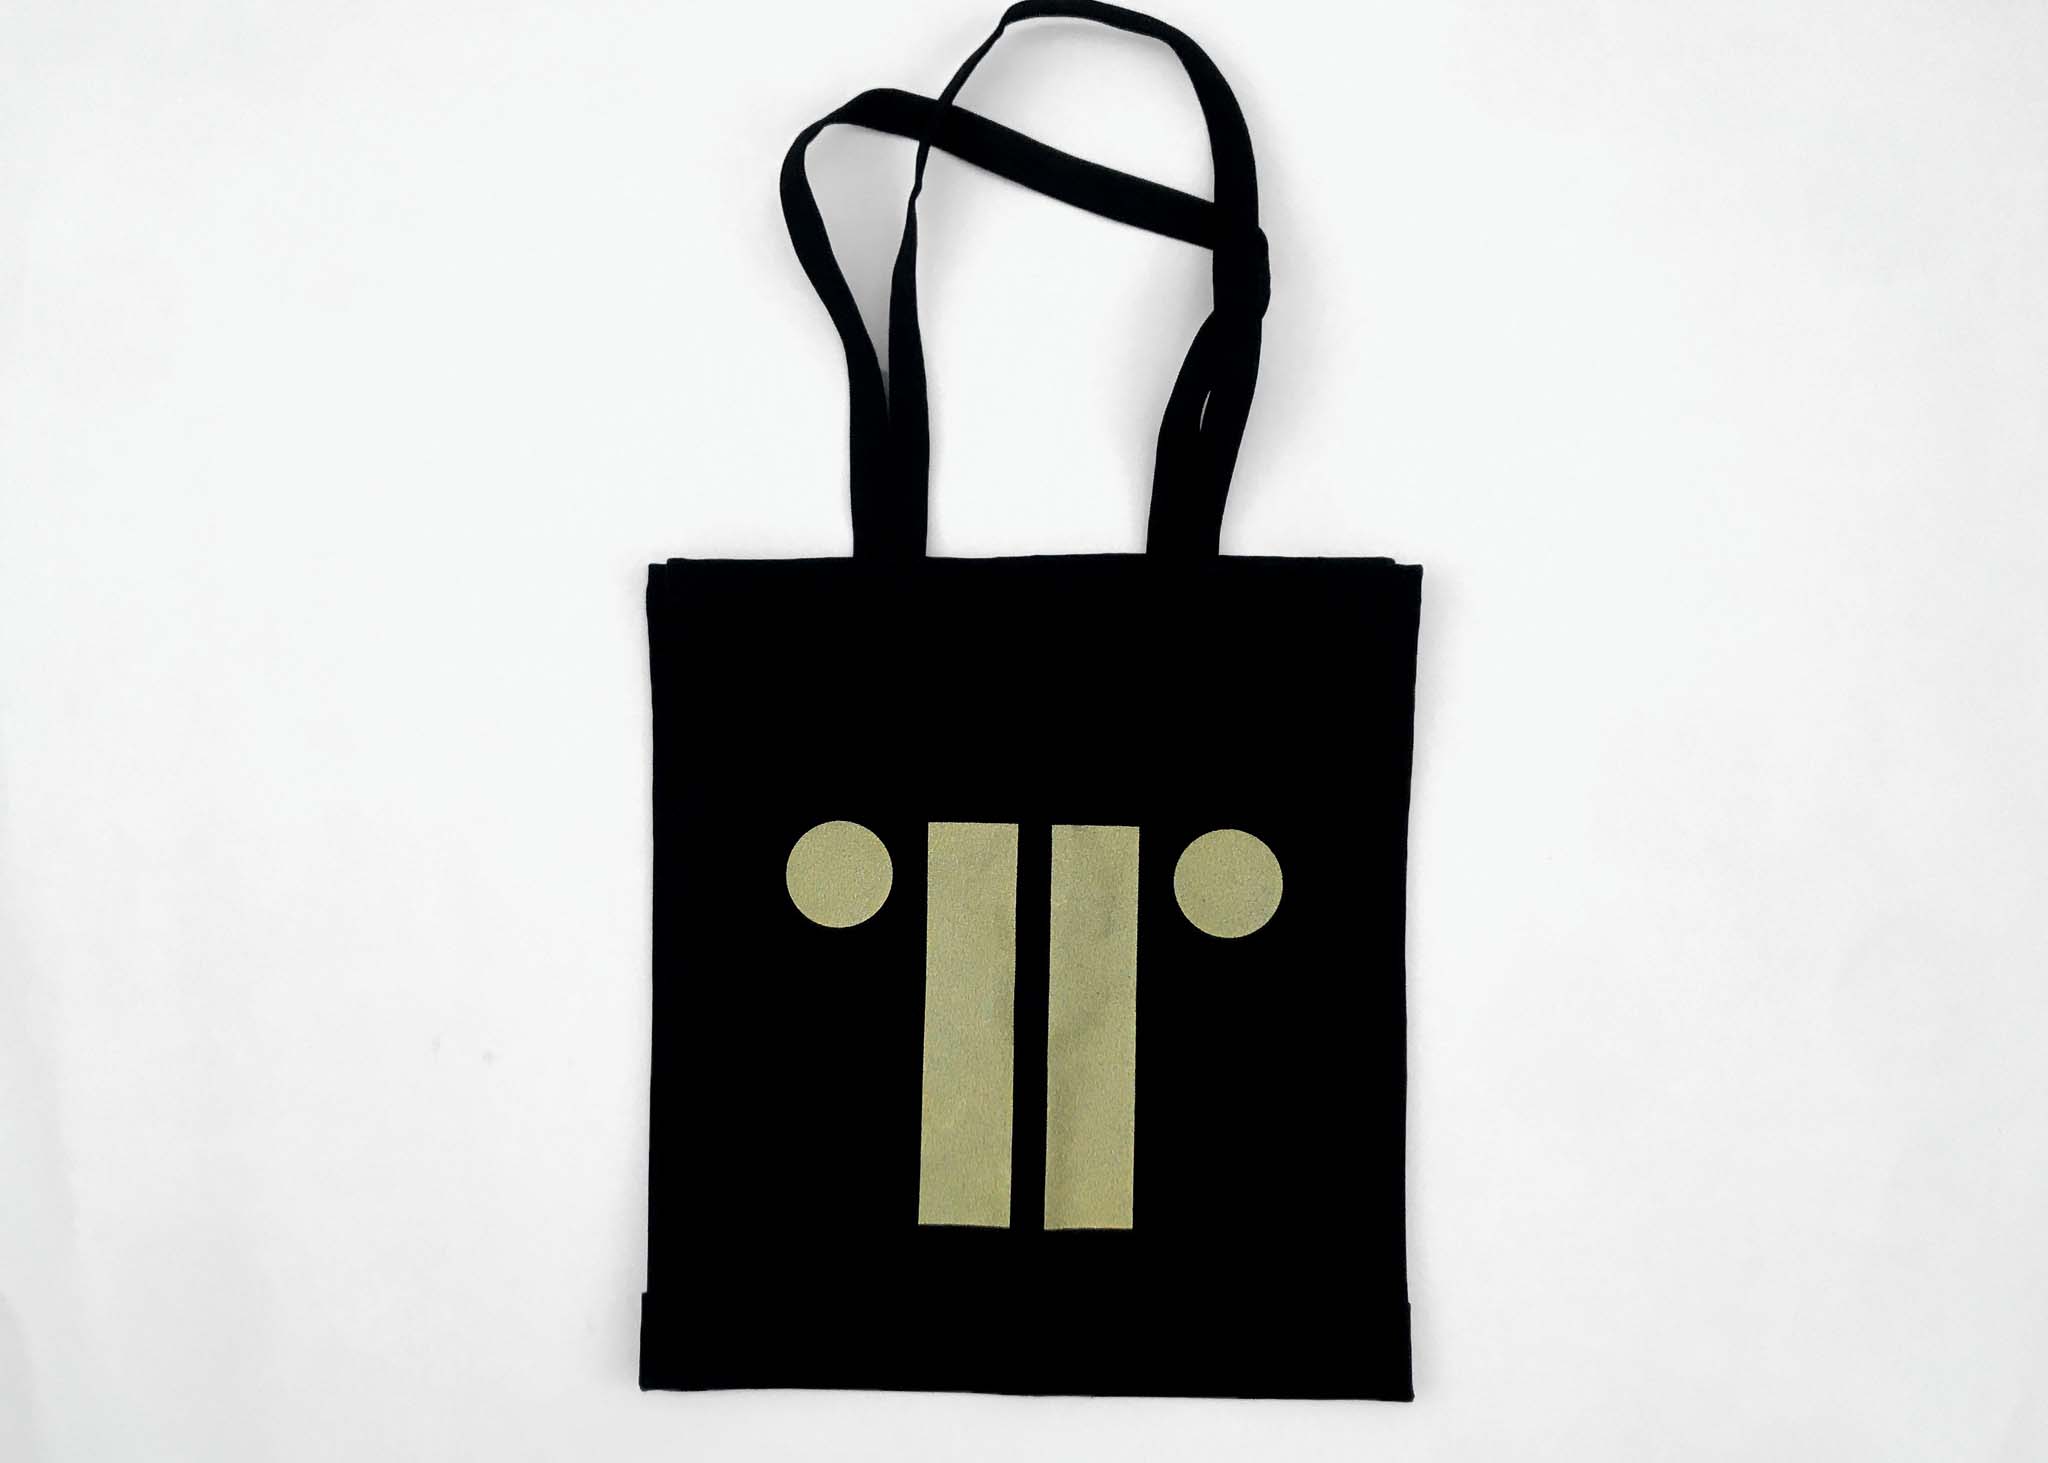 Black tote bag with gold logo